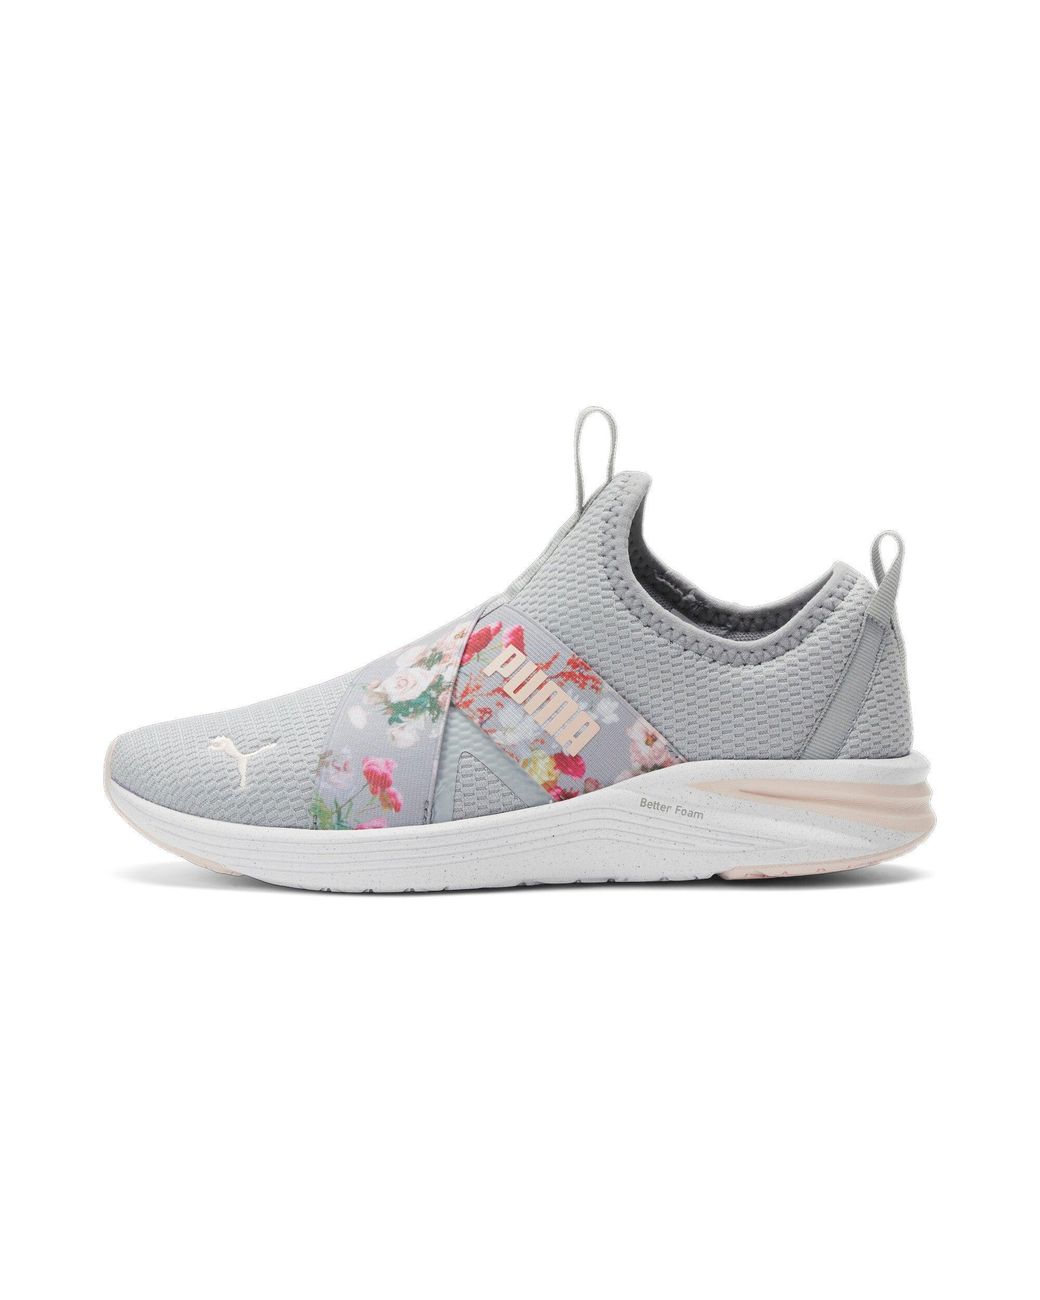 PUMA Better Foam Prowl Floral Slip-on Training Shoes in Gray | Lyst